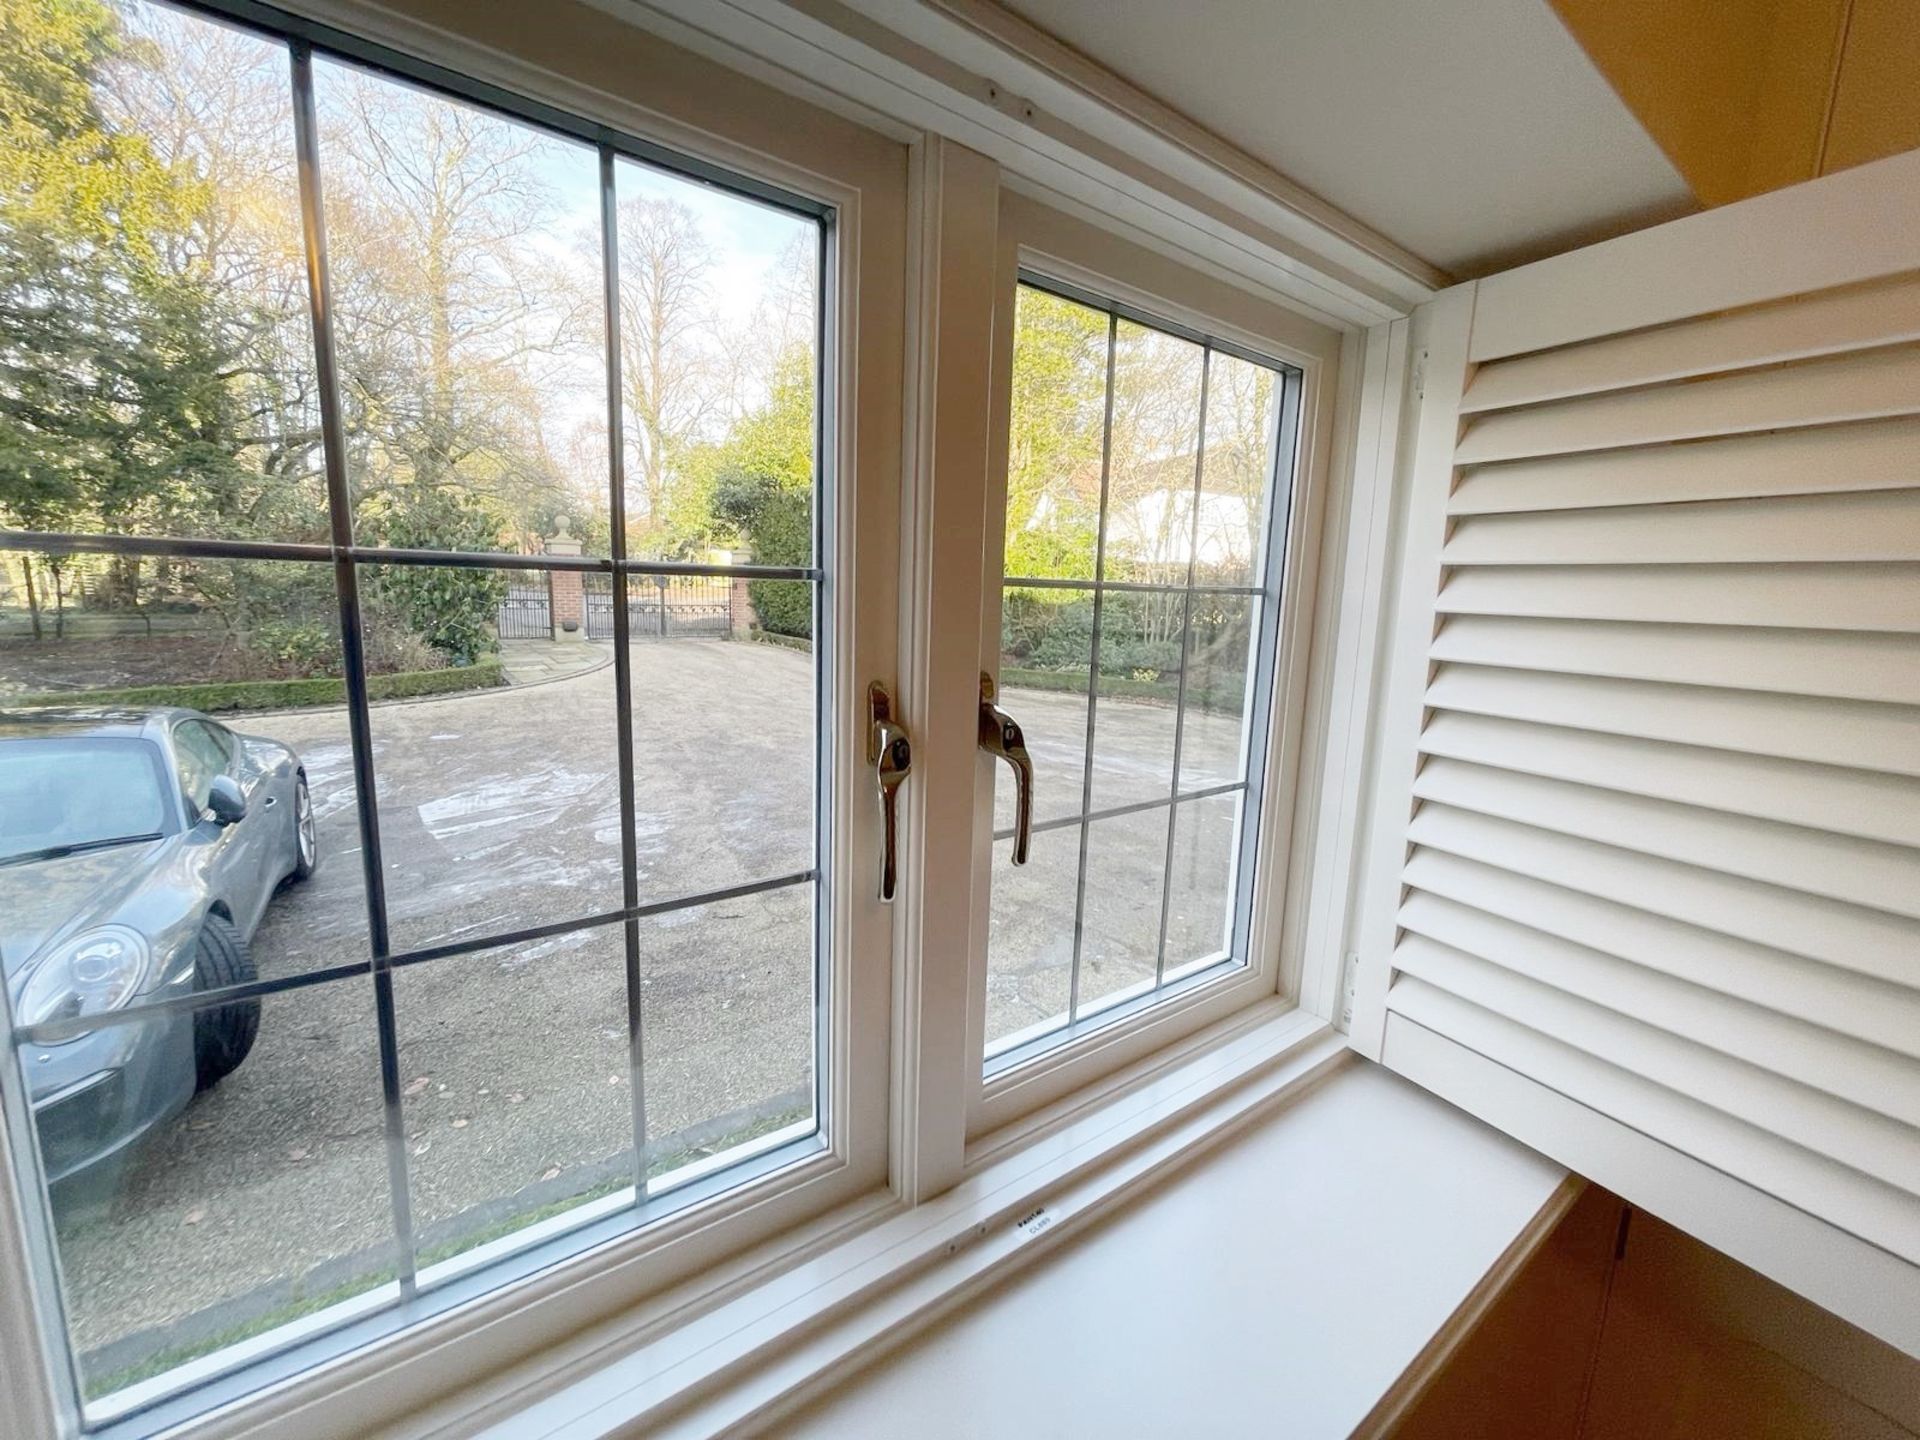 1 x Hardwood Timber Double Glazed Leaded 2-Pane Window Frame fitted with Shutter Blinds - NO VAT - Image 8 of 12